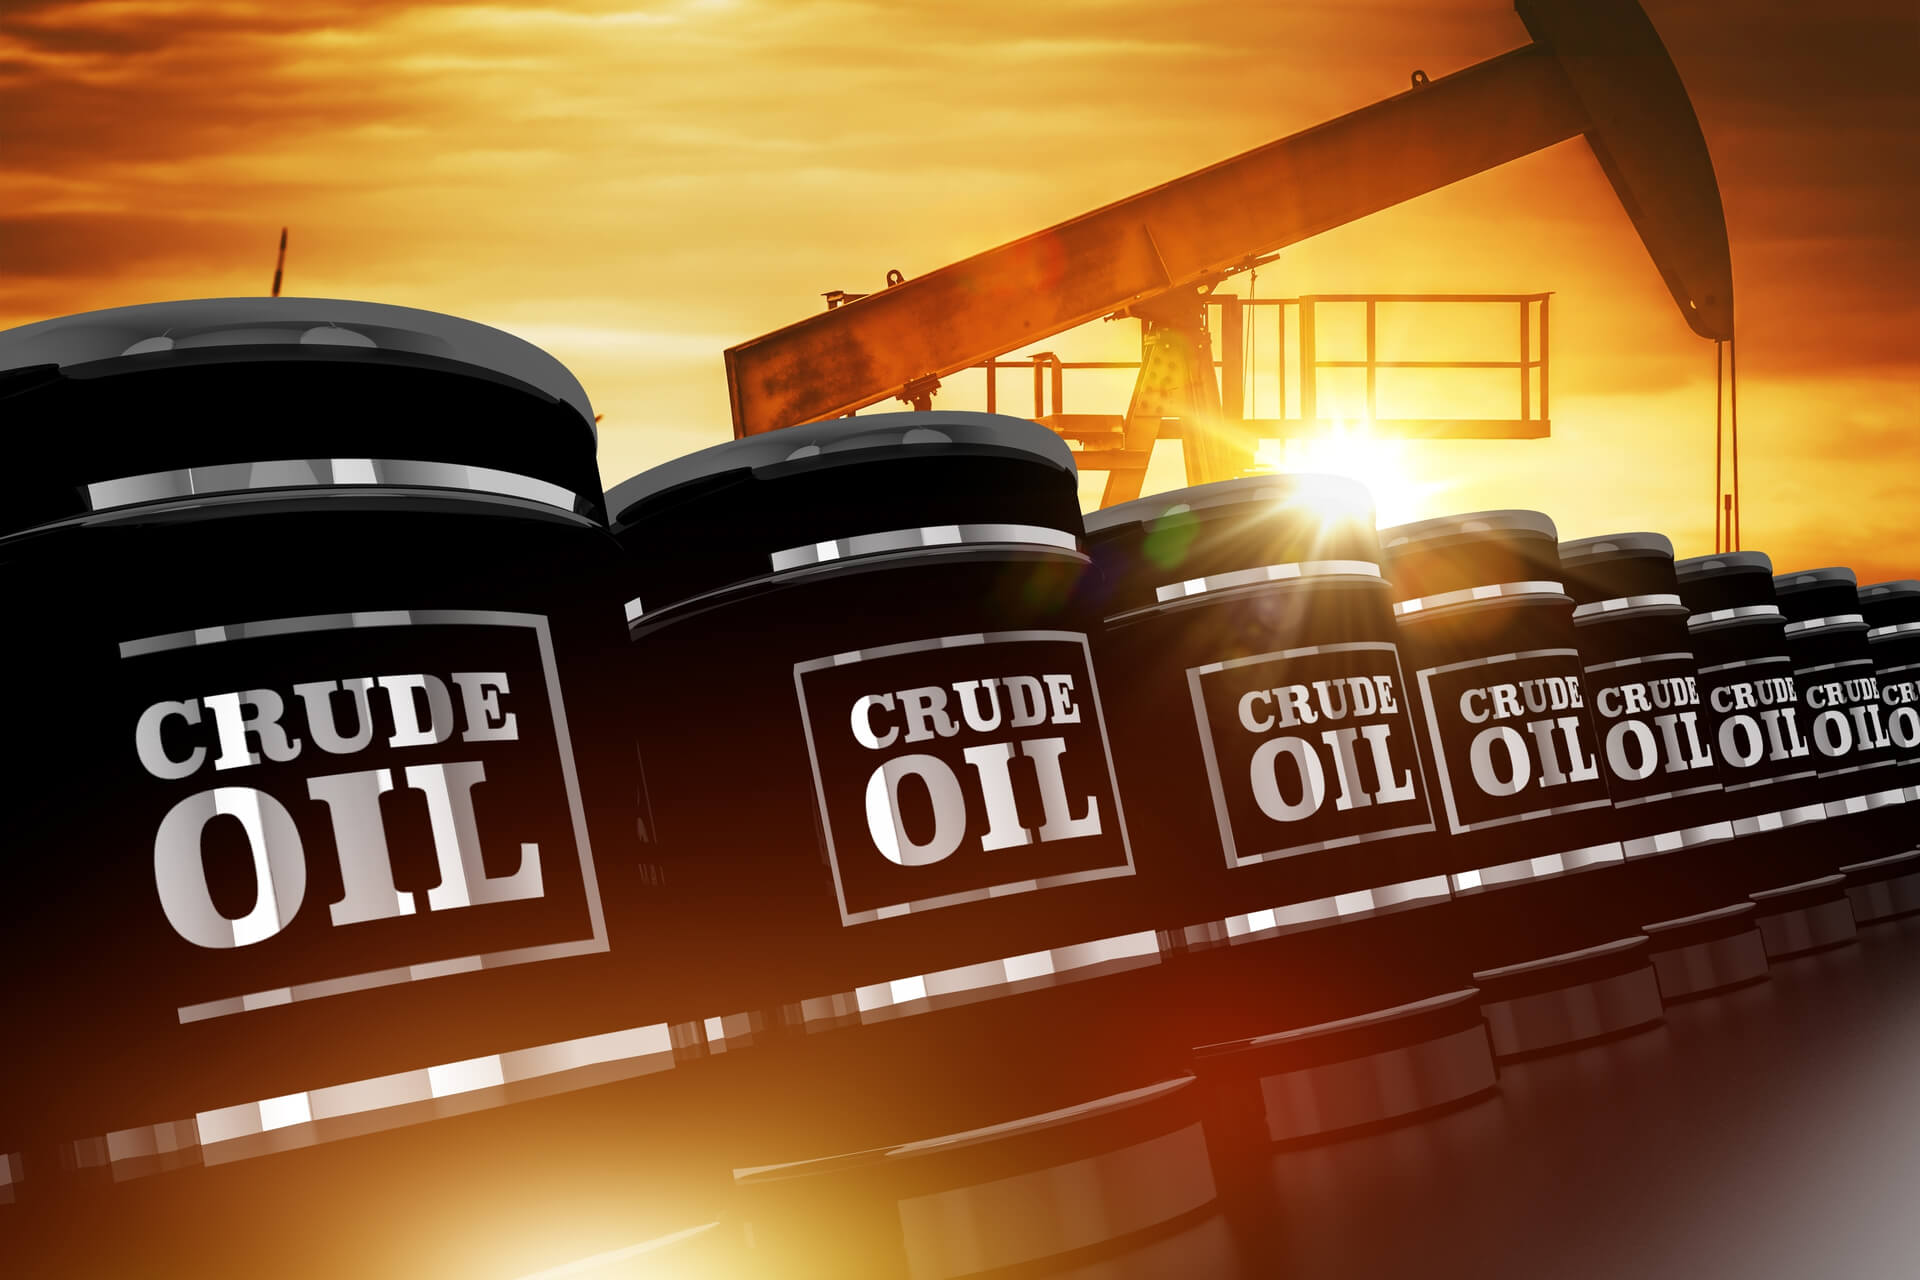 Does Crude Oil Go Bad? | Oil & Gas Information | Pro-Gas